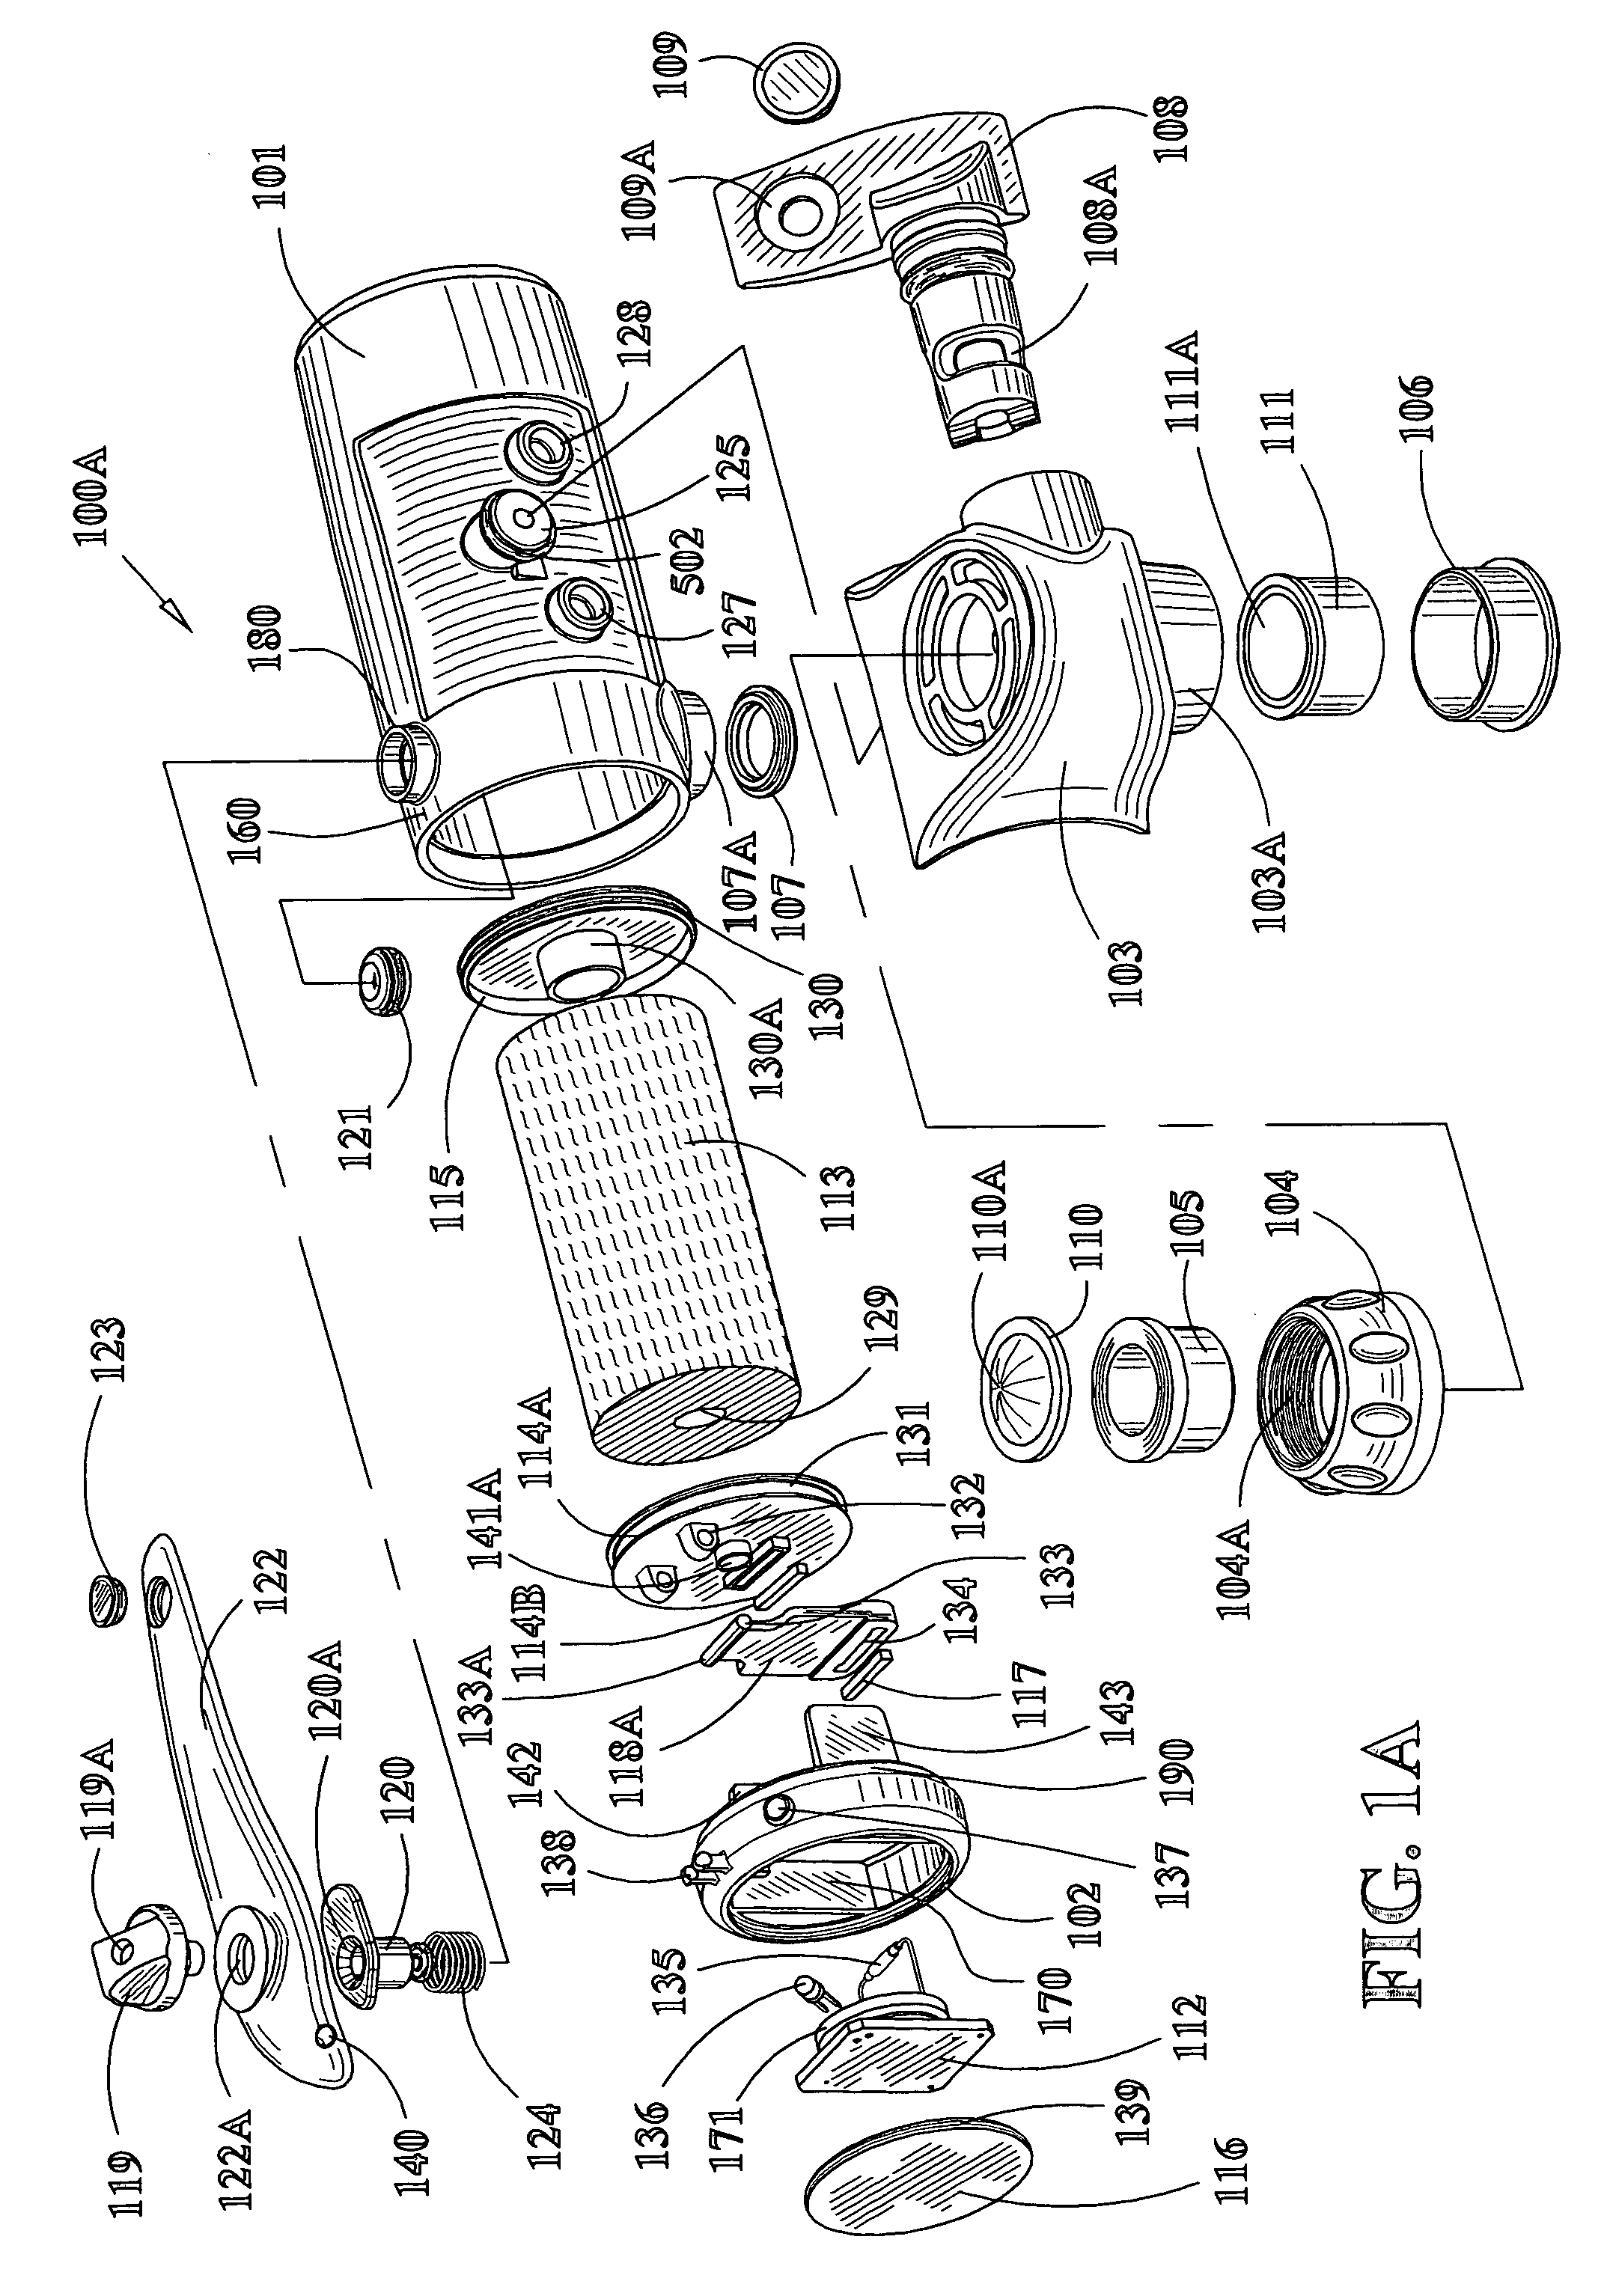 Faucet-mounted water filtration device including gate position sensor